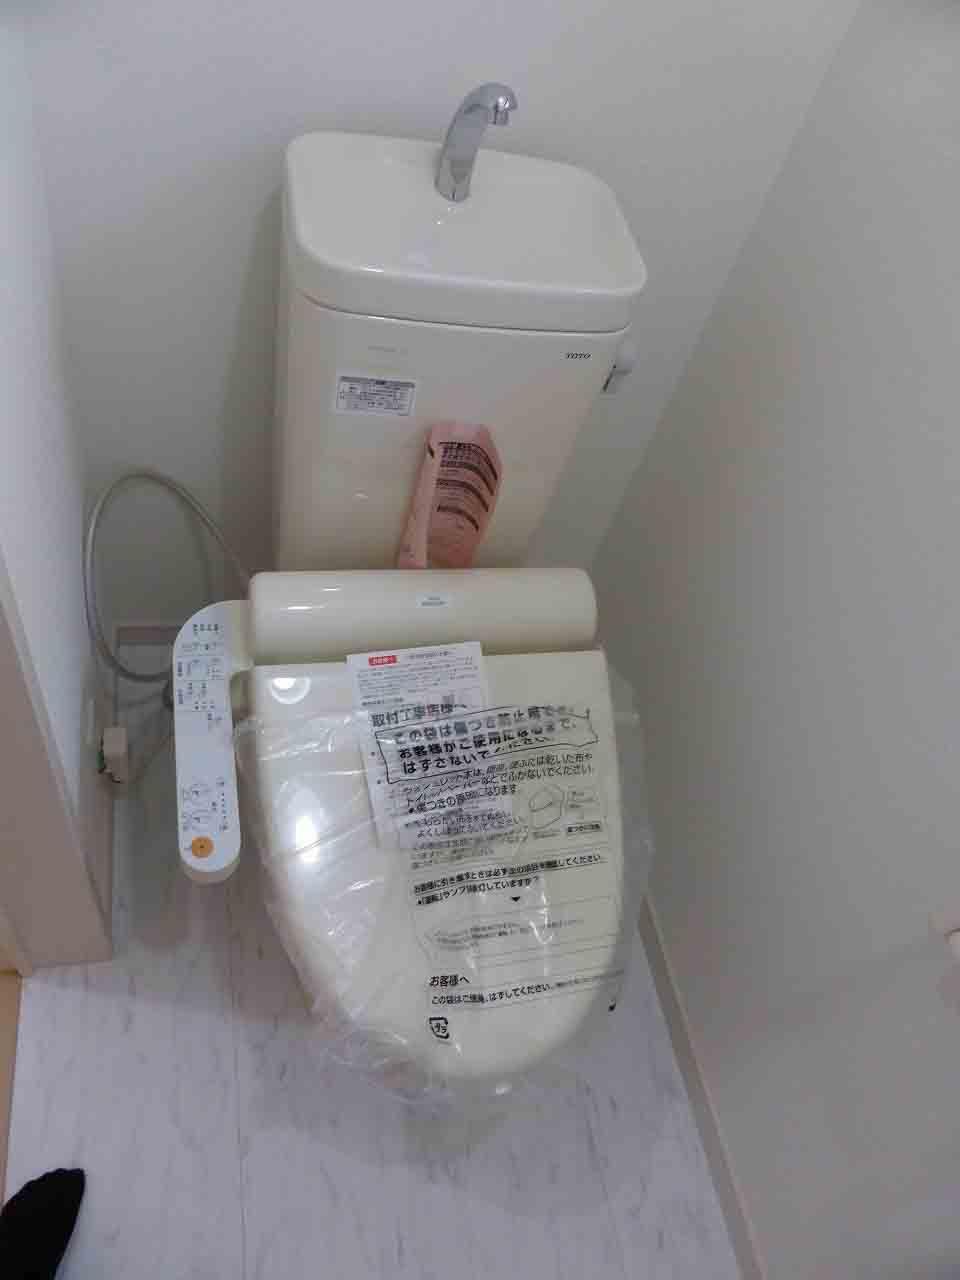 Toilet. Example of construction. It comes with 1F bidet function